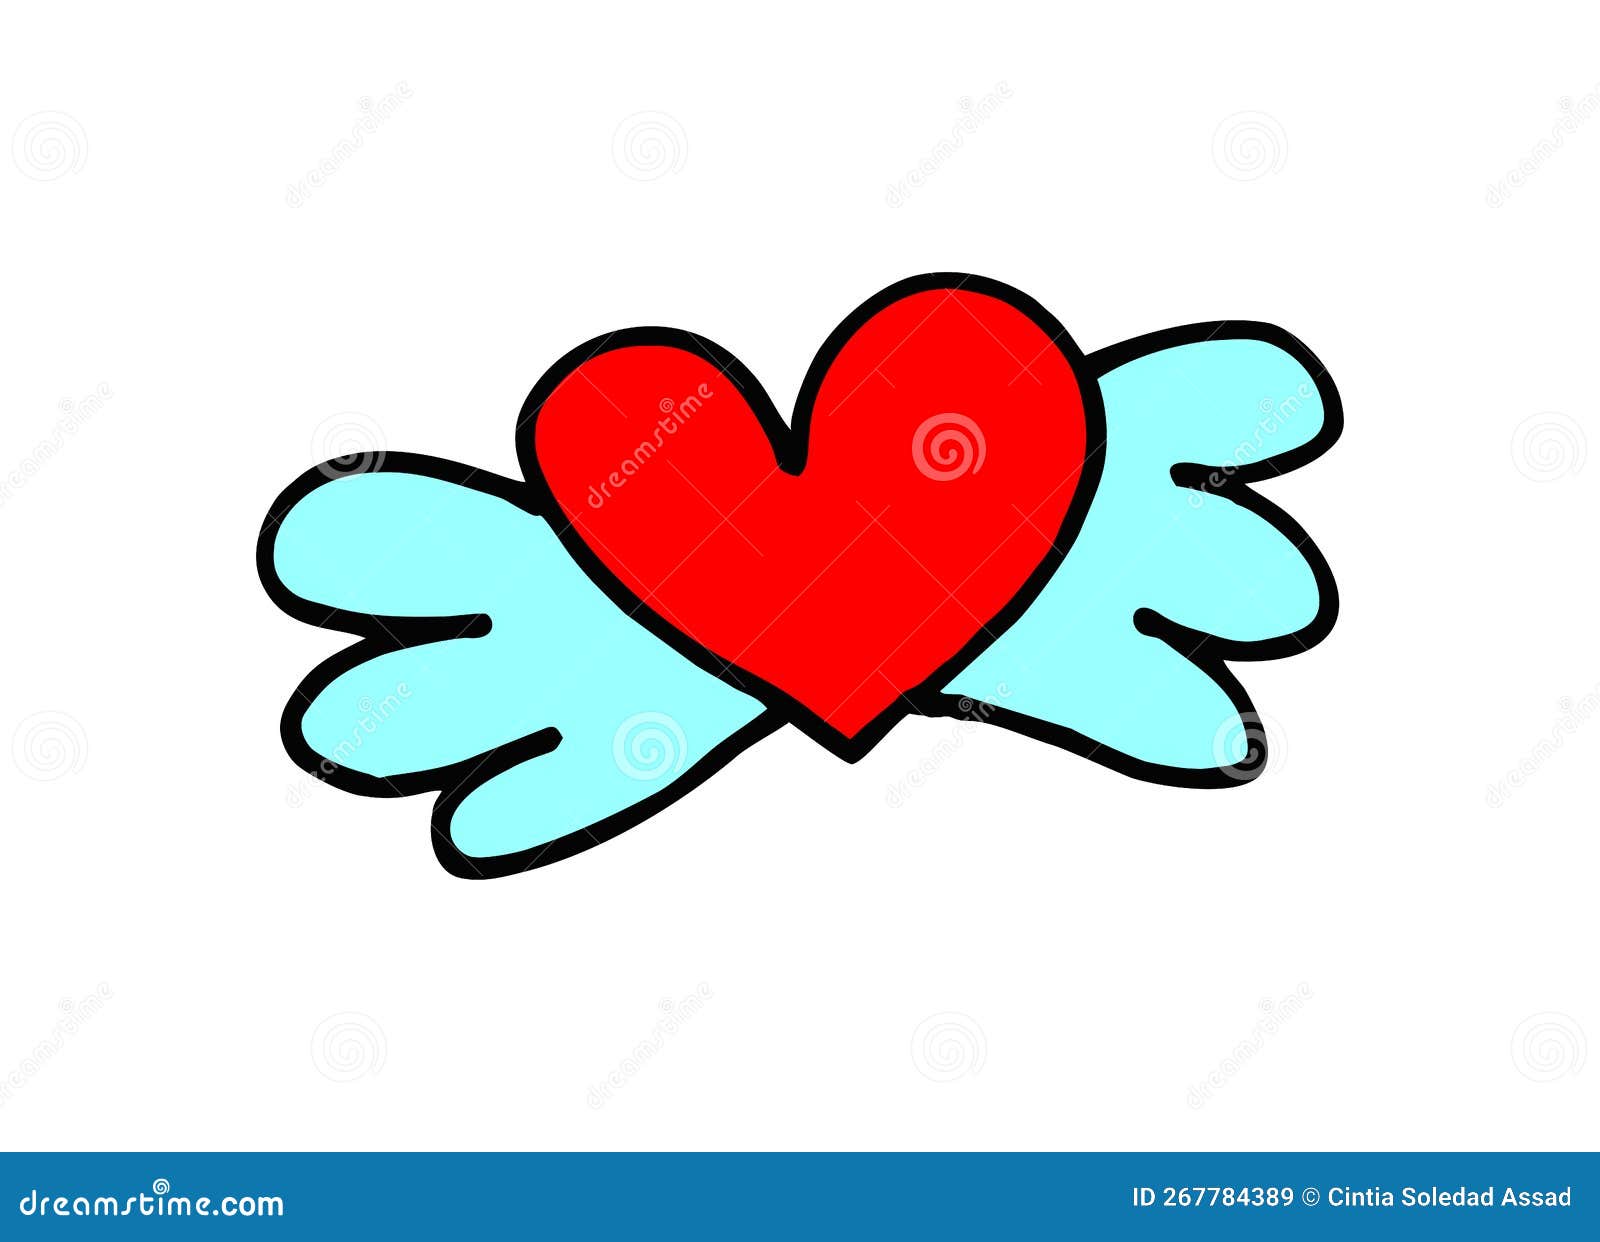 cartoon heart with wings, hand drawing